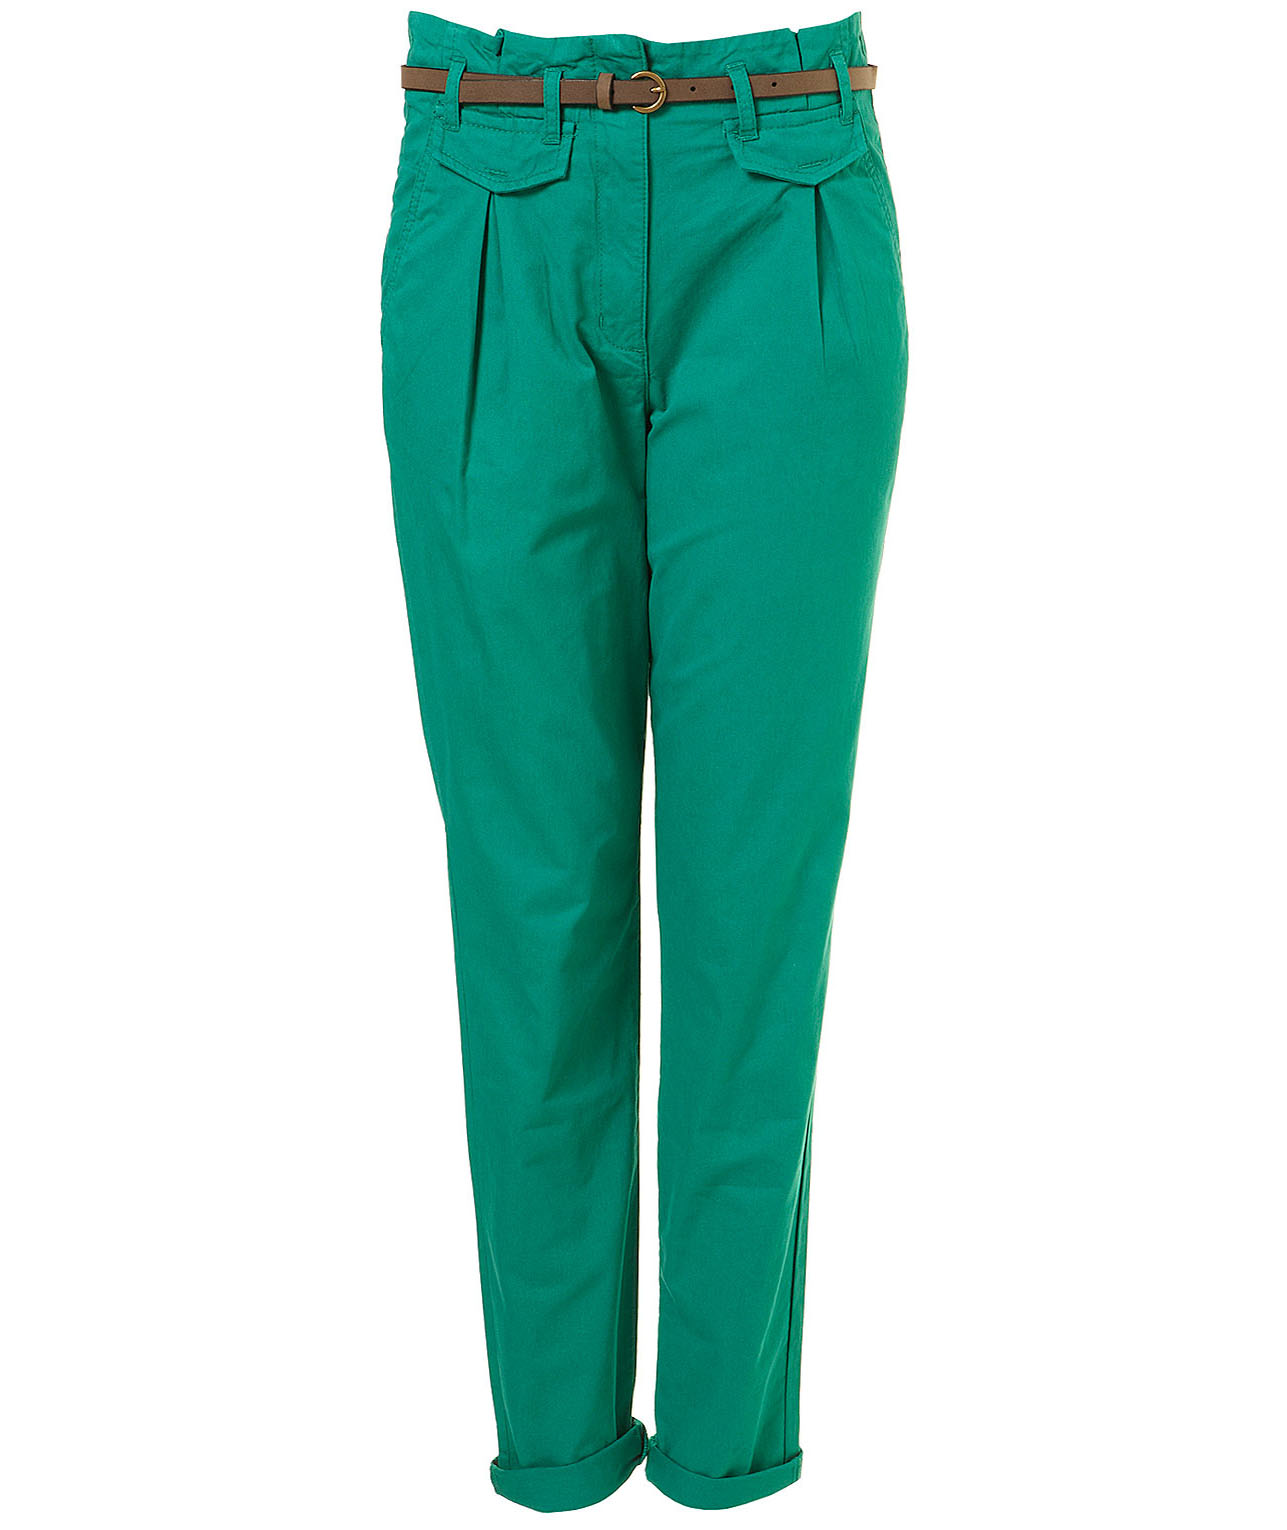 Motte Preorder: Topshop High Waisted Belted Chinos